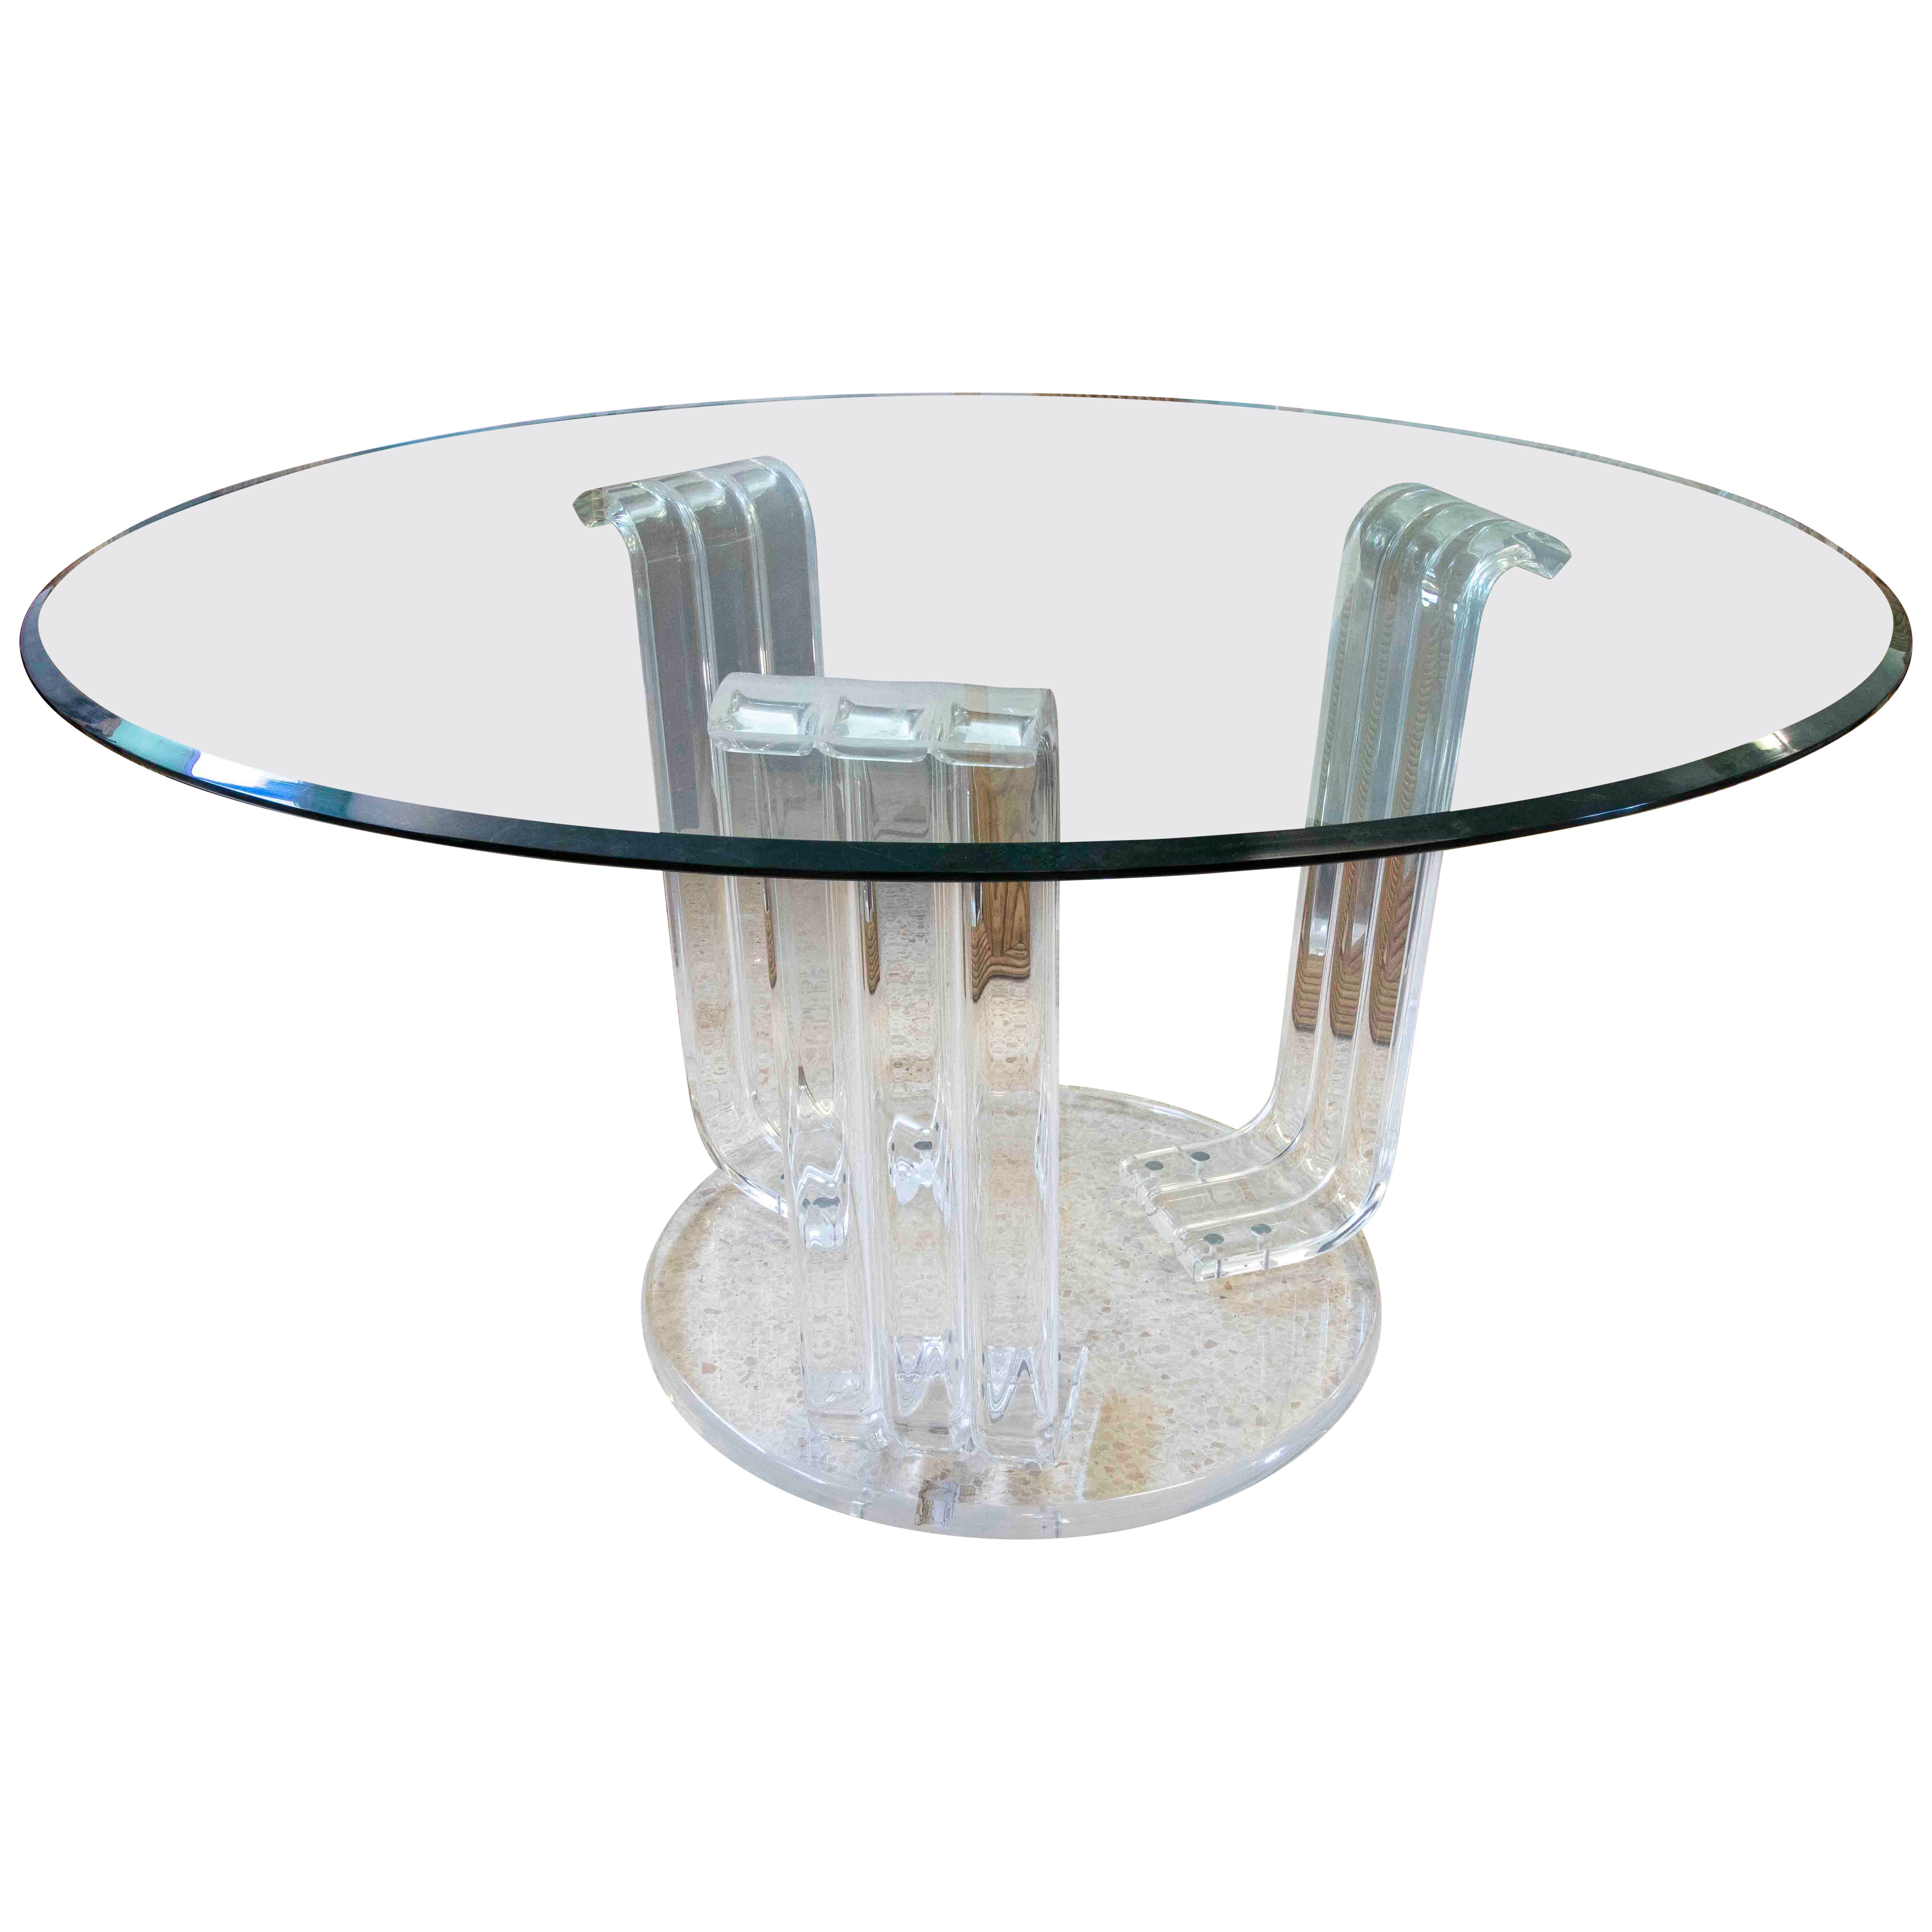 1970s Round Table with Metraquilato Base and Glass Top  For Sale